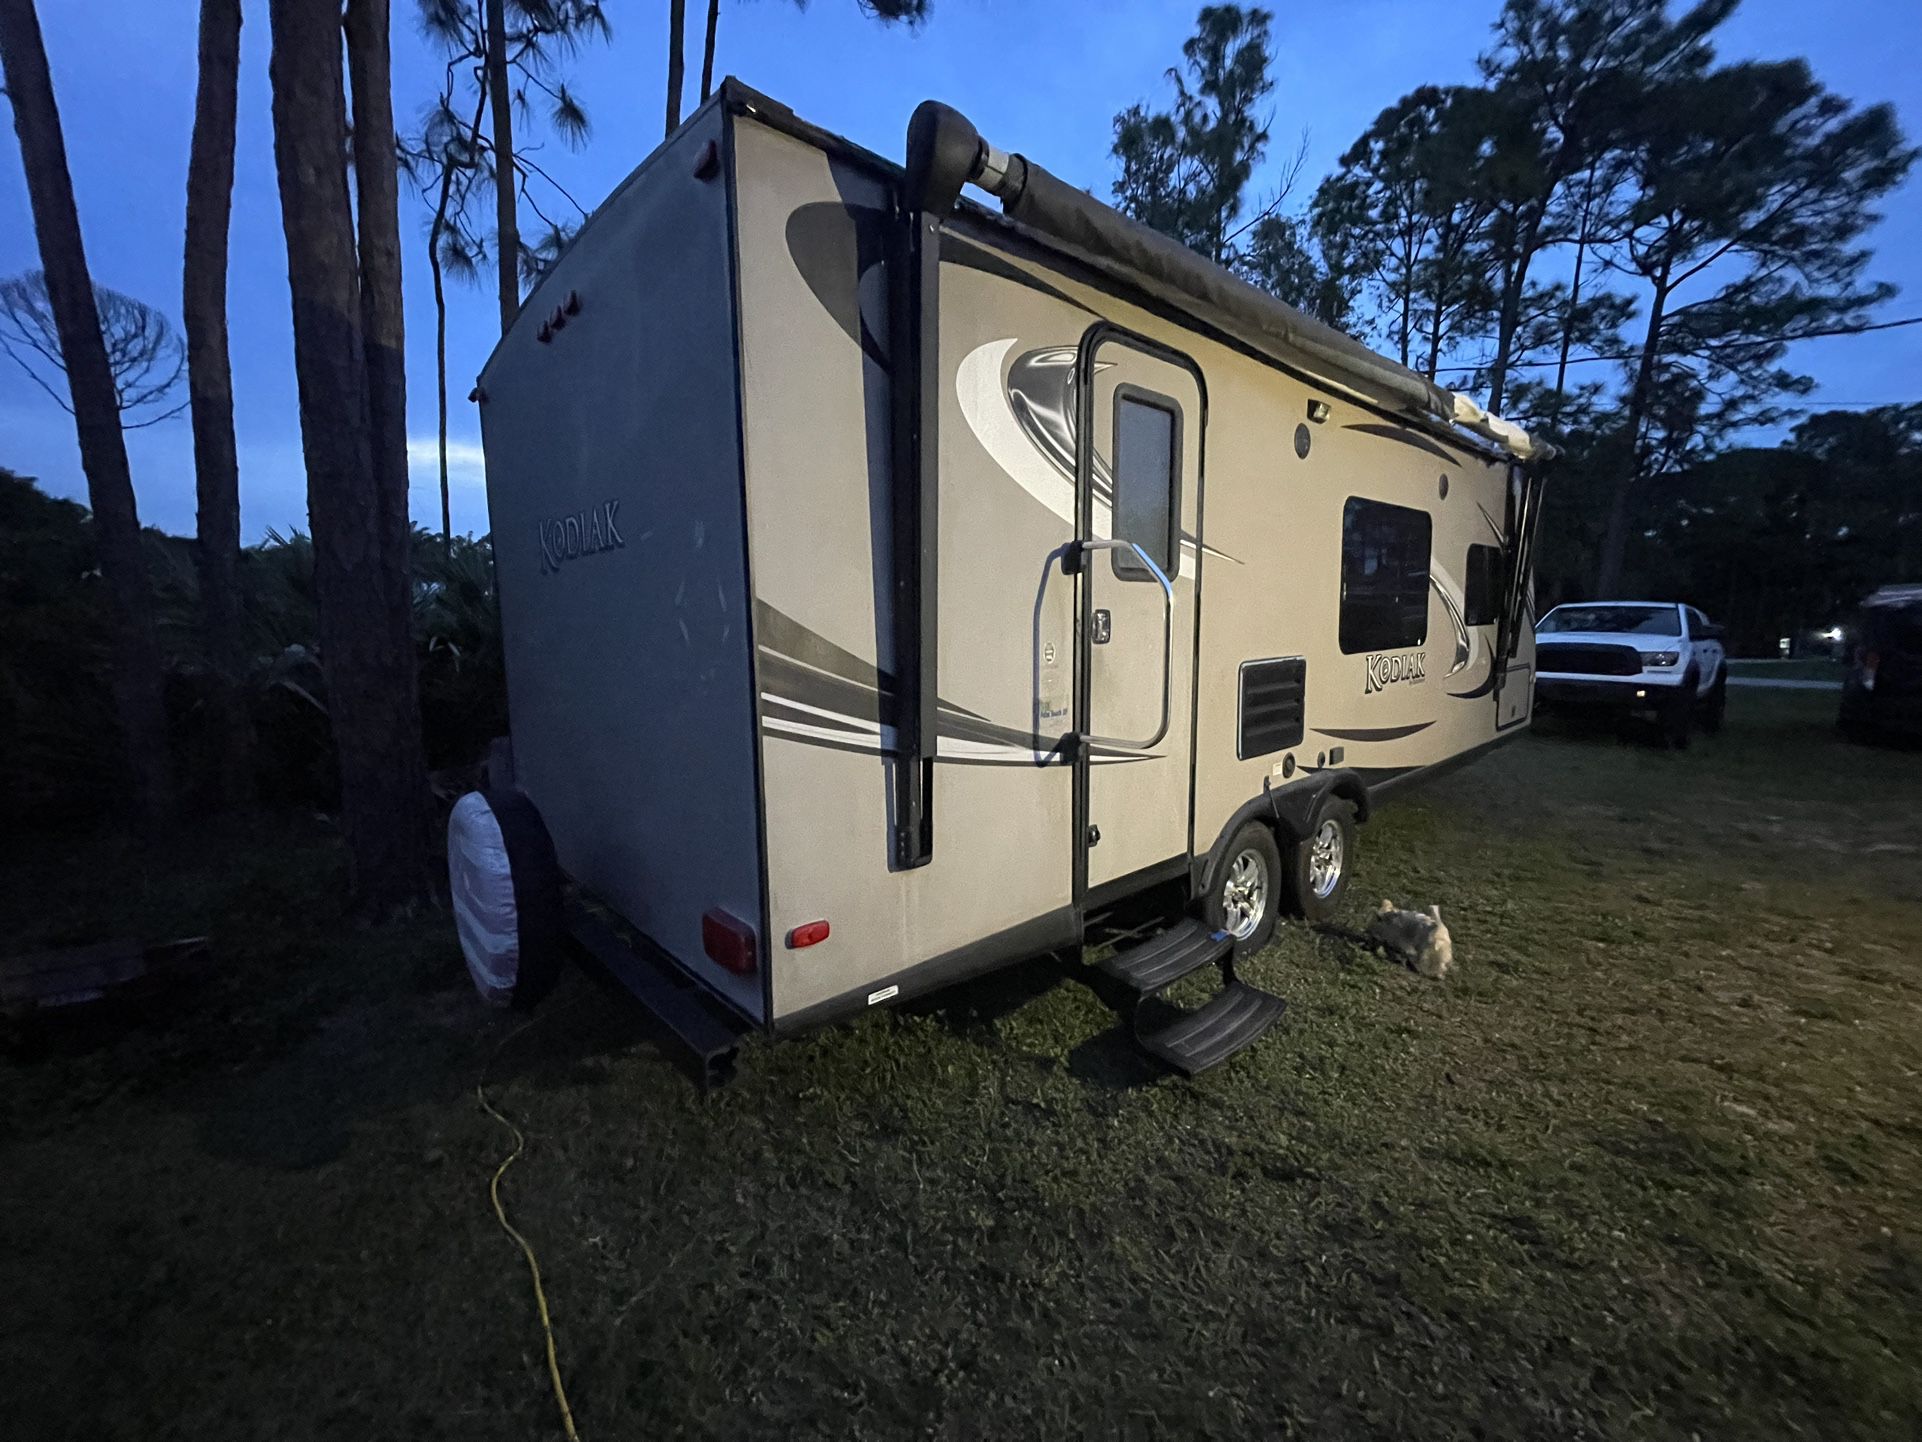 2013 / 224’/ Travel Trailer / Tiny Home/ RV. Solid Trailer with no leaks. Power, lights, water & plumbing works. Includes power & plumbing hookups. Ne